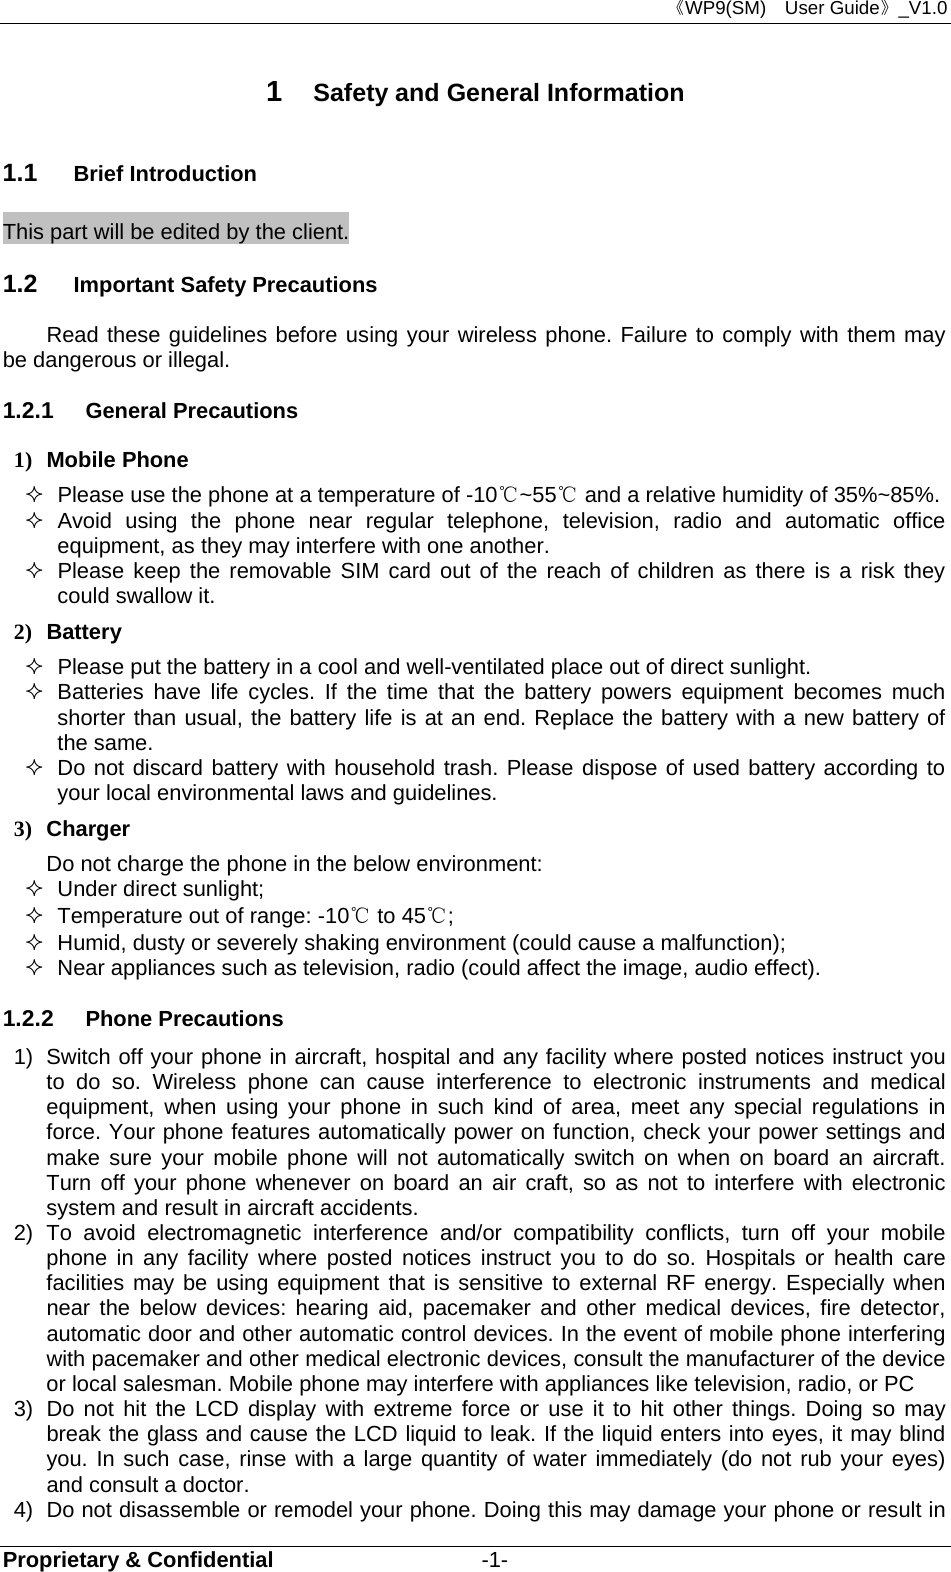 《WP9(SM)  User Guide》_V1.0 Proprietary &amp; Confidential                   -1- 1  Safety and General Information 1.1  Brief Introduction This part will be edited by the client. 1.2  Important Safety Precautions Read these guidelines before using your wireless phone. Failure to comply with them may be dangerous or illegal. 1.2.1  General Precautions 1) Mobile Phone   Please use the phone at a temperature of -10℃~55  and a relative humidity of ℃35%~85%.  Avoid using the phone near regular telephone, television, radio and automatic office equipment, as they may interfere with one another.   Please keep the removable SIM card out of the reach of children as there is a risk they could swallow it. 2) Battery   Please put the battery in a cool and well-ventilated place out of direct sunlight.   Batteries have life cycles. If the time that the battery powers equipment becomes much shorter than usual, the battery life is at an end. Replace the battery with a new battery of the same.   Do not discard battery with household trash. Please dispose of used battery according to your local environmental laws and guidelines. 3) Charger Do not charge the phone in the below environment:   Under direct sunlight;     Temperature out of range: -10℃ to 45℃;    Humid, dusty or severely shaking environment (could cause a malfunction);     Near appliances such as television, radio (could affect the image, audio effect). 1.2.2  Phone Precautions 1)  Switch off your phone in aircraft, hospital and any facility where posted notices instruct you to do so. Wireless phone can cause interference to electronic instruments and medical equipment, when using your phone in such kind of area, meet any special regulations in force. Your phone features automatically power on function, check your power settings and make sure your mobile phone will not automatically switch on when on board an aircraft. Turn off your phone whenever on board an air craft, so as not to interfere with electronic system and result in aircraft accidents. 2) To avoid electromagnetic interference and/or compatibility conflicts, turn off your mobile phone in any facility where posted notices instruct you to do so. Hospitals or health care facilities may be using equipment that is sensitive to external RF energy. Especially when near the below devices: hearing aid, pacemaker and other medical devices, fire detector, automatic door and other automatic control devices. In the event of mobile phone interfering with pacemaker and other medical electronic devices, consult the manufacturer of the device or local salesman. Mobile phone may interfere with appliances like television, radio, or PC 3)  Do not hit the LCD display with extreme force or use it to hit other things. Doing so may break the glass and cause the LCD liquid to leak. If the liquid enters into eyes, it may blind you. In such case, rinse with a large quantity of water immediately (do not rub your eyes) and consult a doctor. 4)  Do not disassemble or remodel your phone. Doing this may damage your phone or result in 